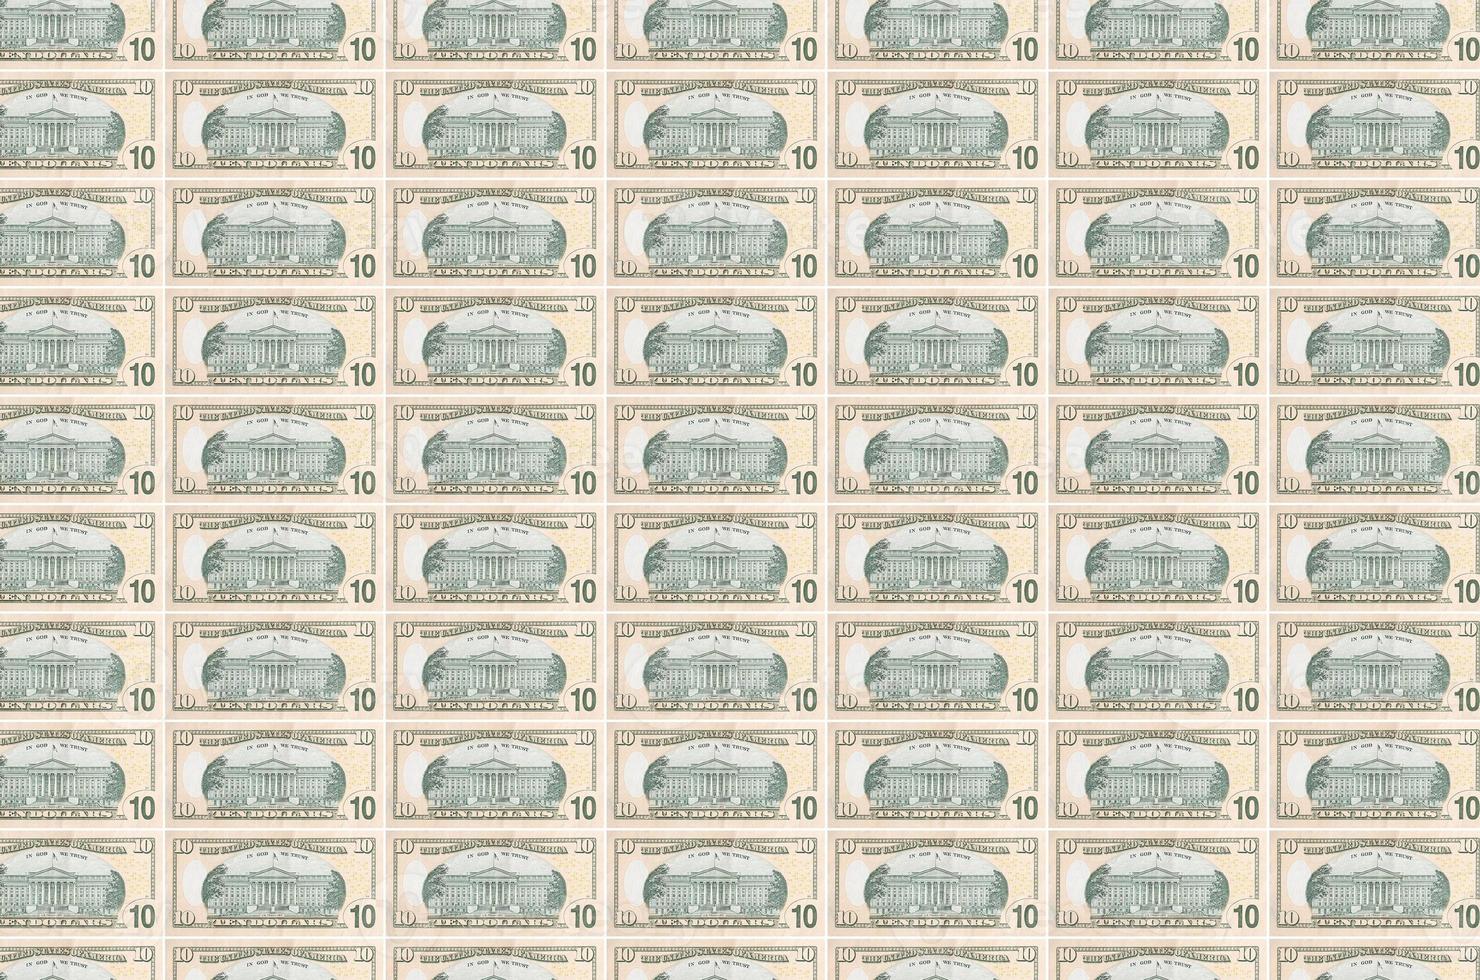 10 US dollars bills printed in money production conveyor. Collage of many bills. Concept of currency devaluation photo